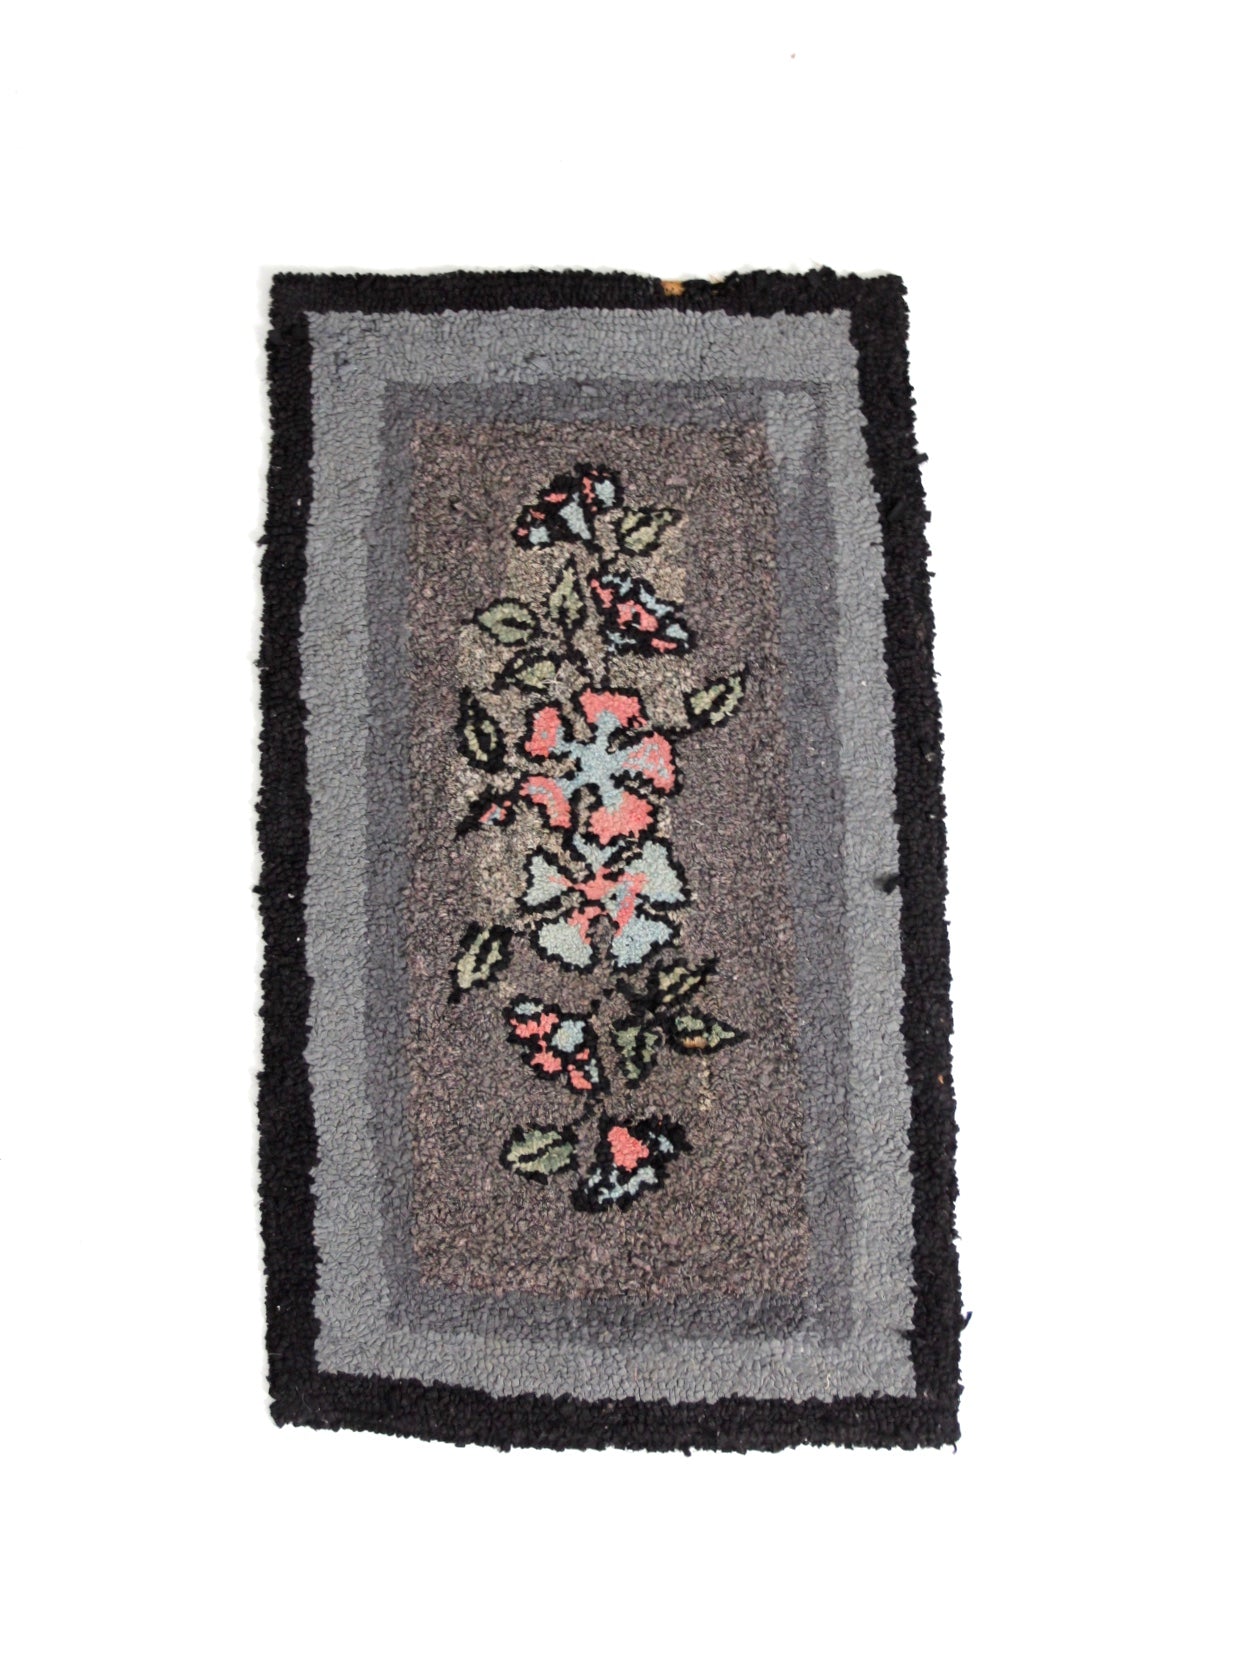 antique hooked rug, 3.5' x 2'